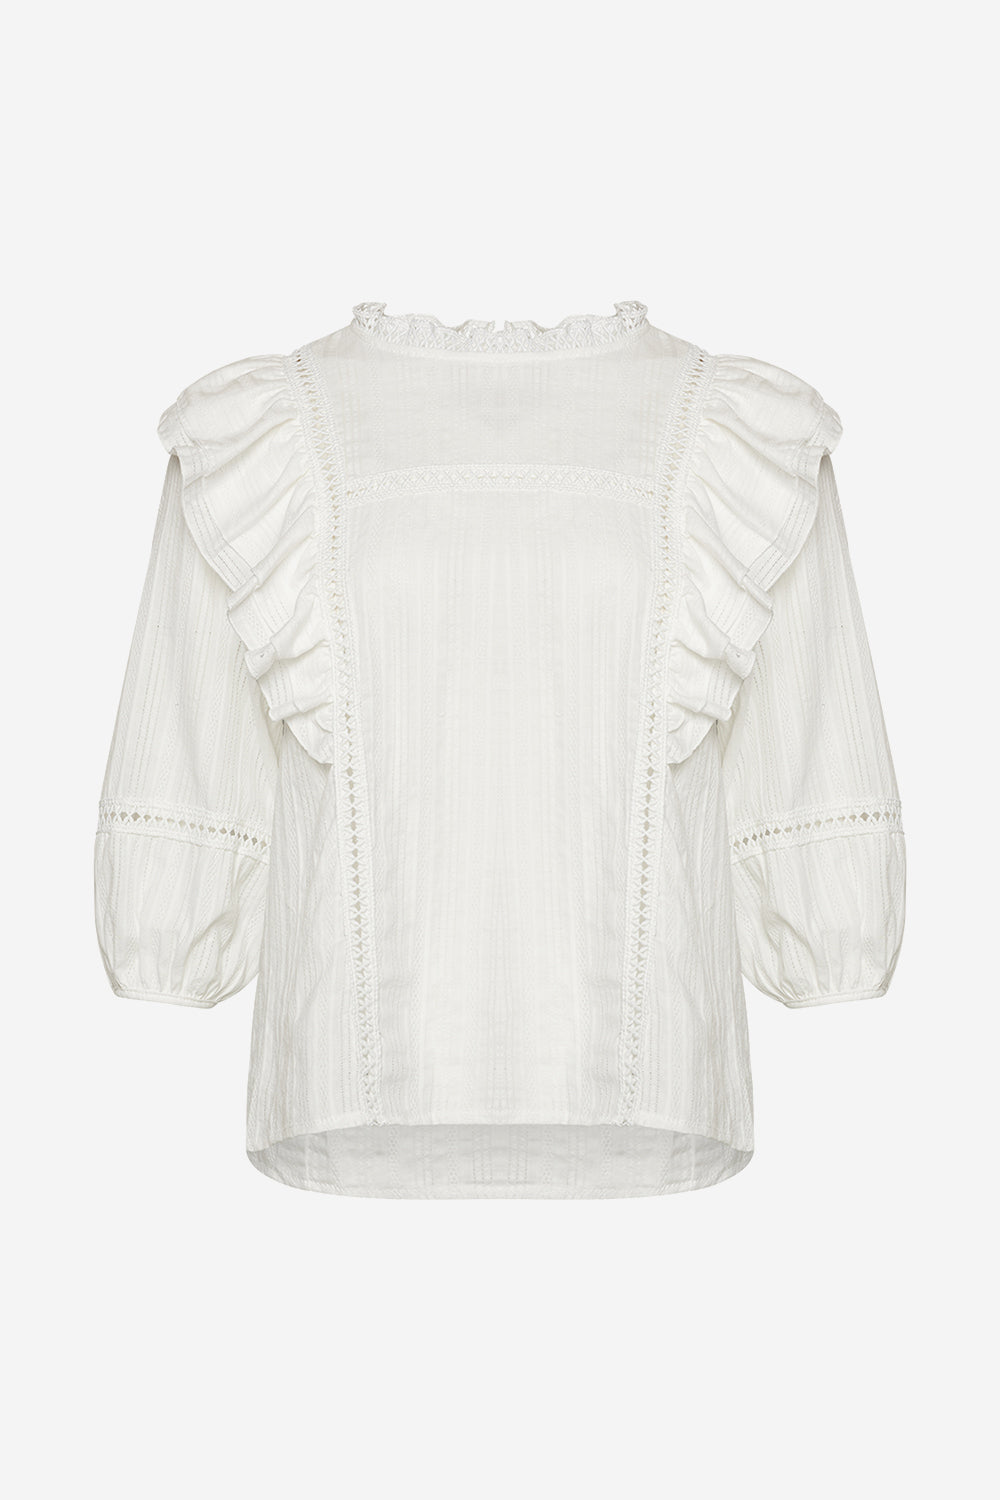 Lucca Blouse White